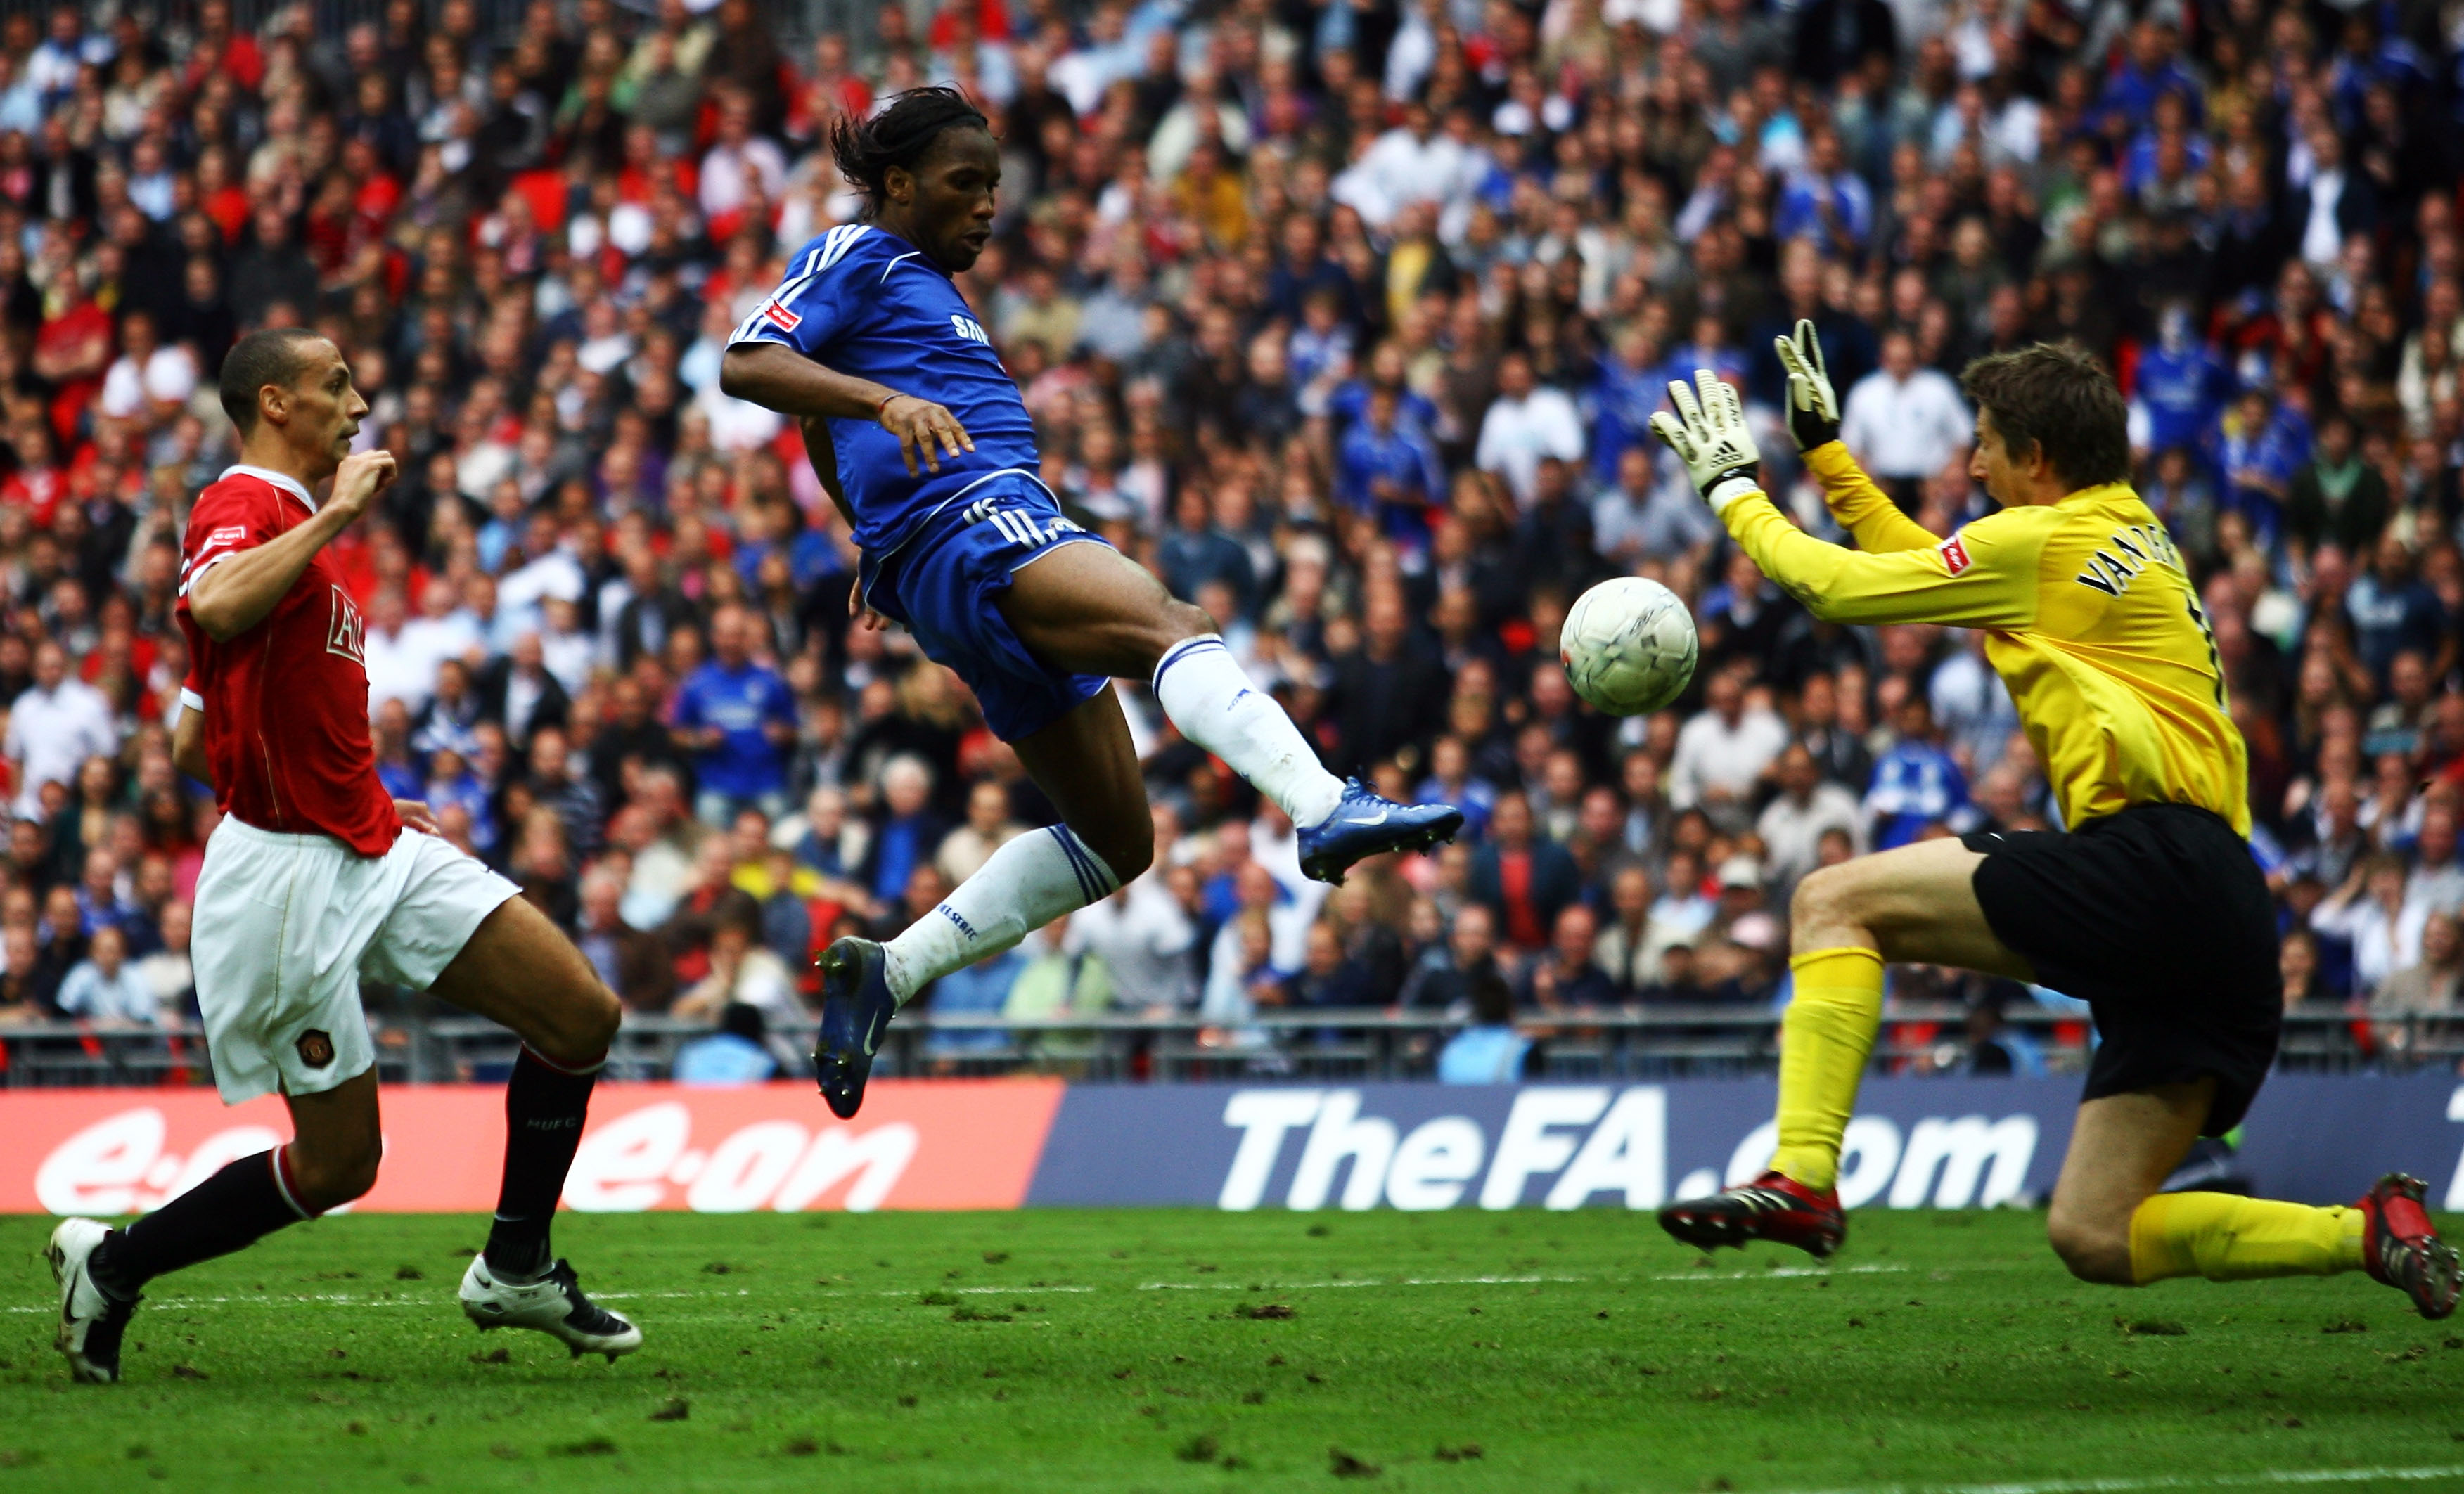 LONDON - MAY 19:  Didier Drogba of Chelsea beats Edwin Van der Sar of Manchester United to score their first goal during the FA Cup Final match sponsored by E.ON between Manchester United and Chelsea at Wembley Stadium on May 19, 2007 in London, England.